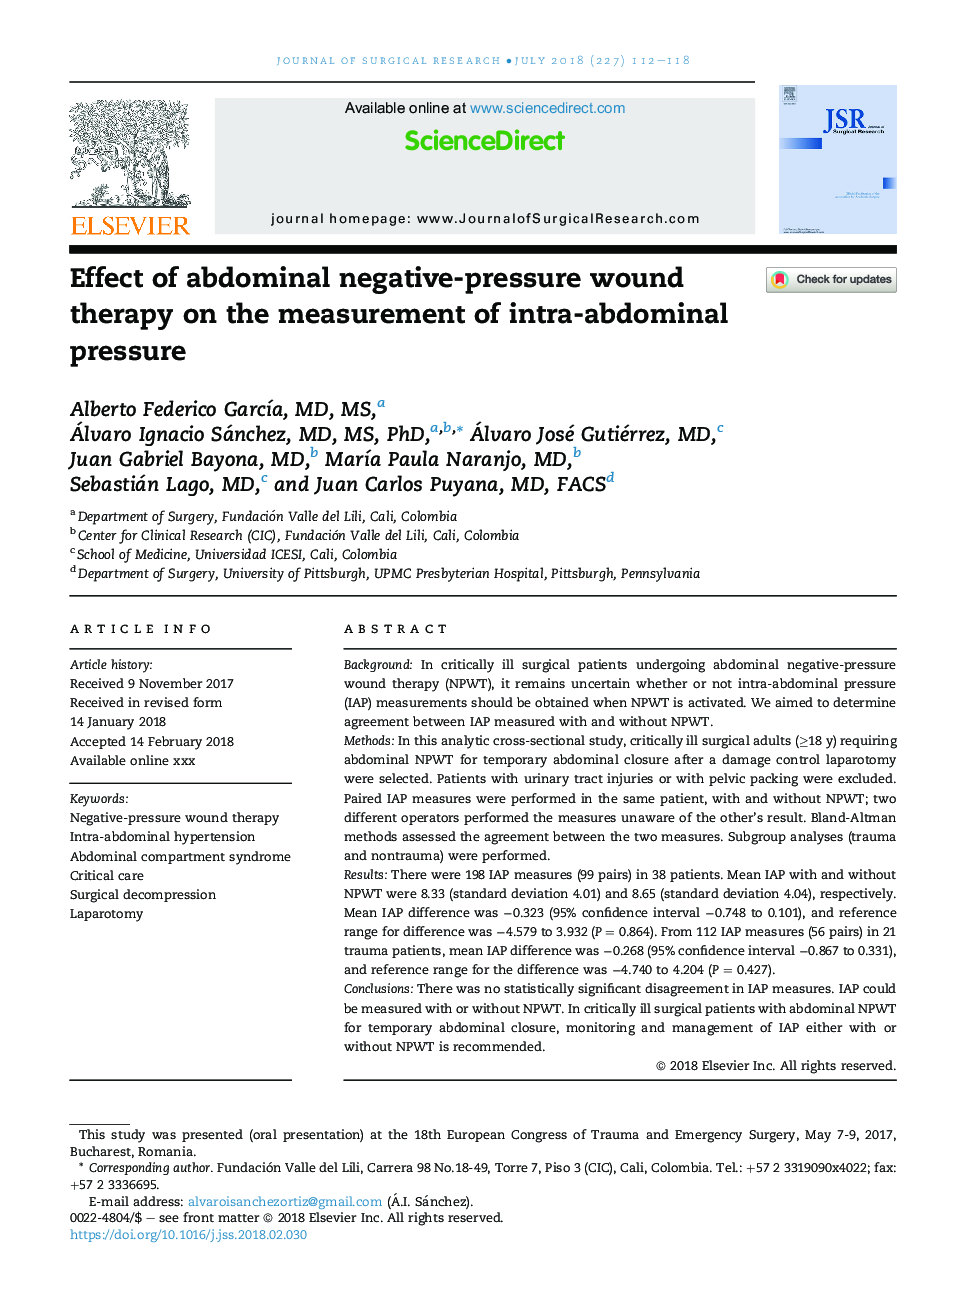 Effect of abdominal negative-pressure wound therapy on the measurement of intra-abdominal pressure